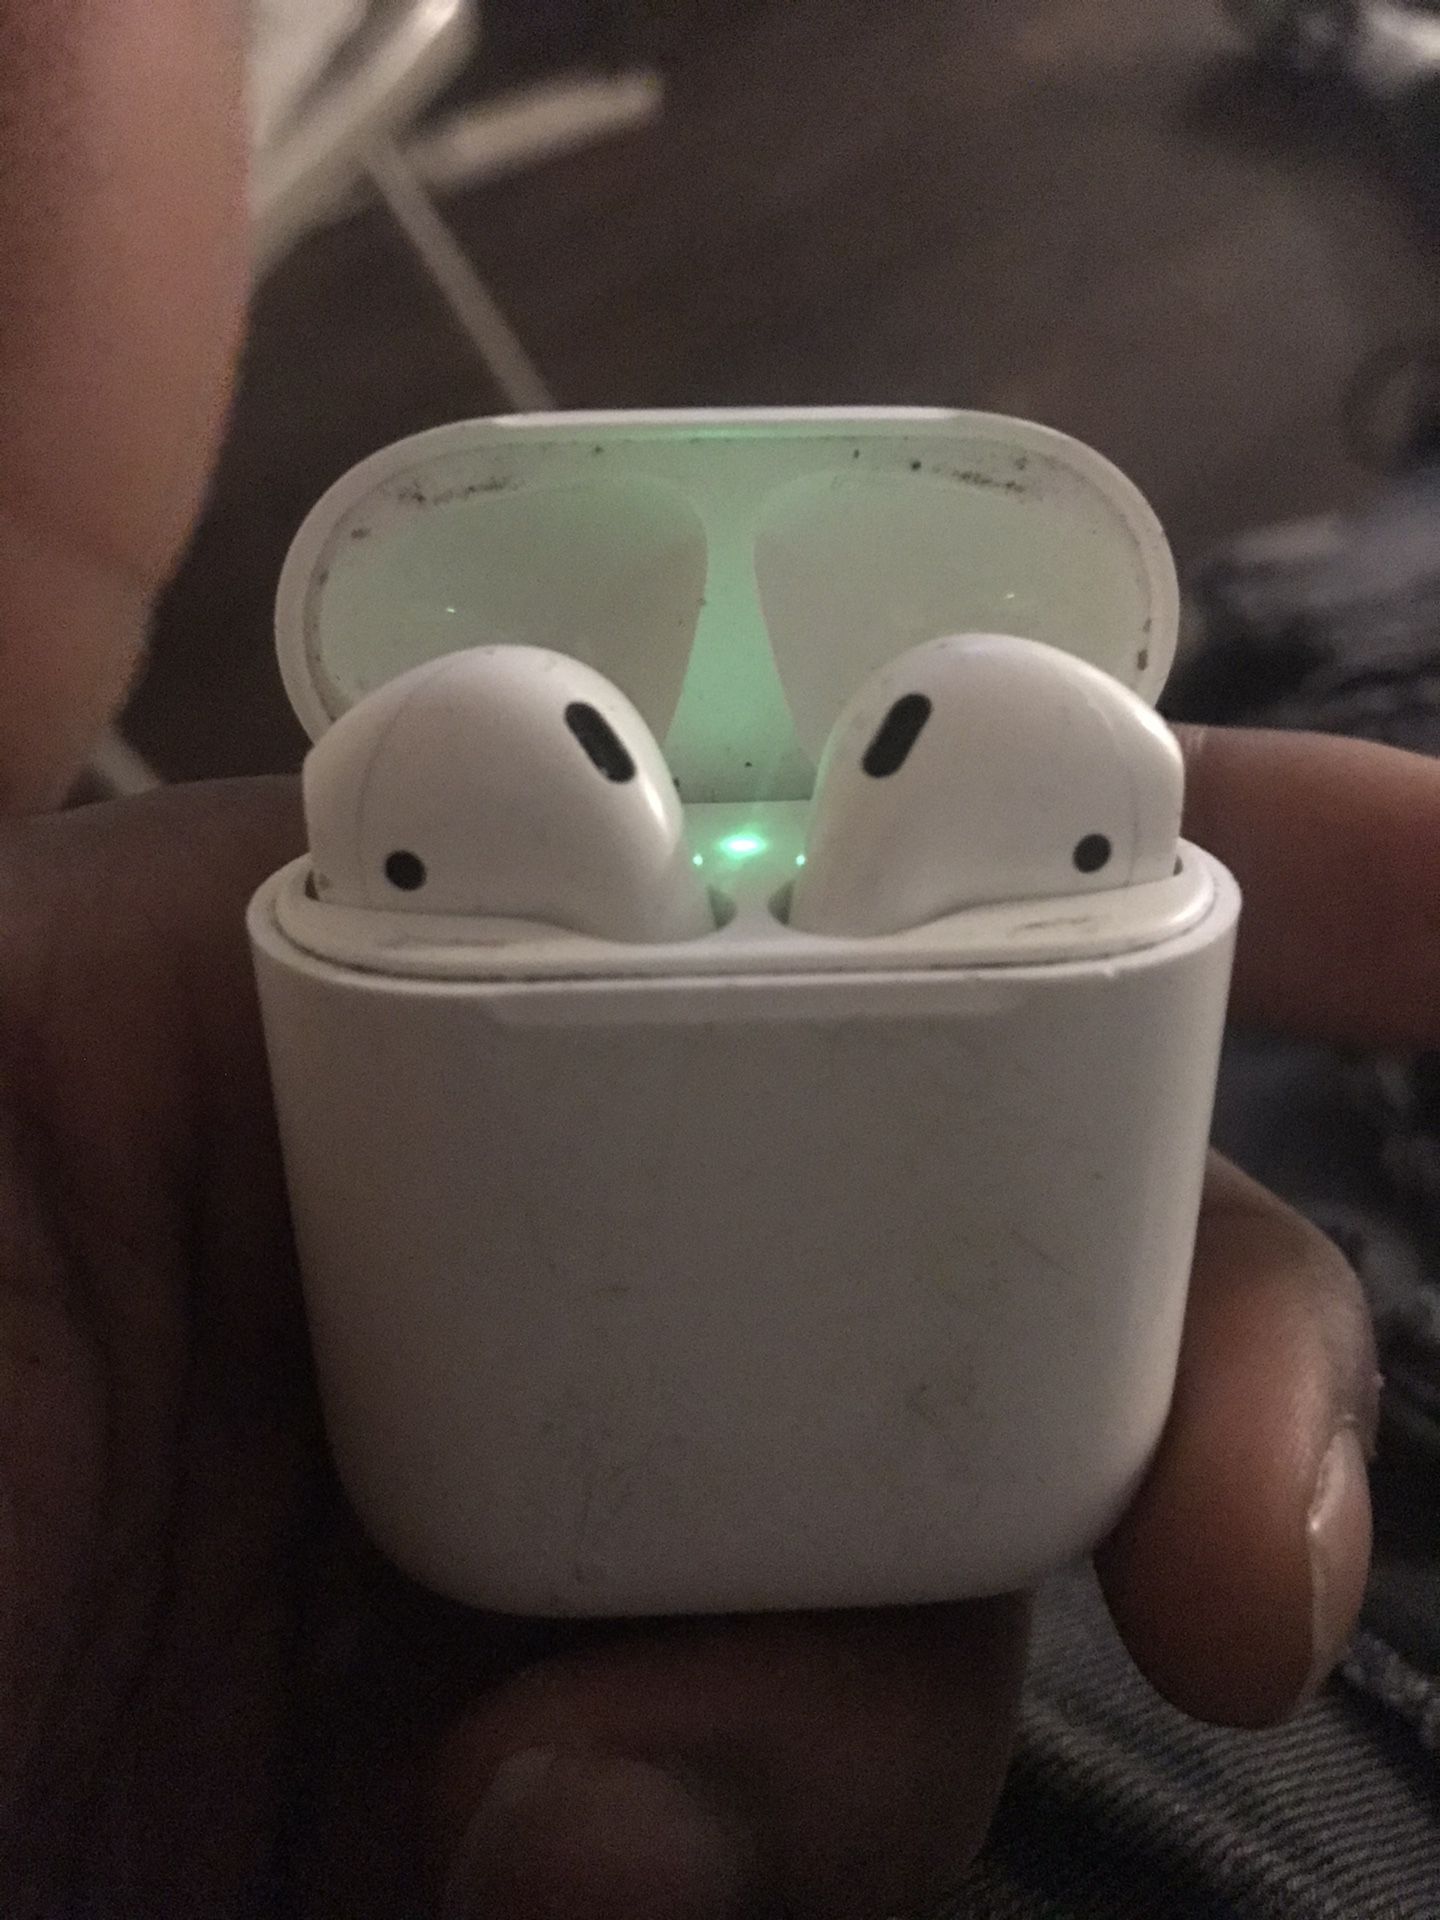 APPLE AIRPODS 2nd GENERATION